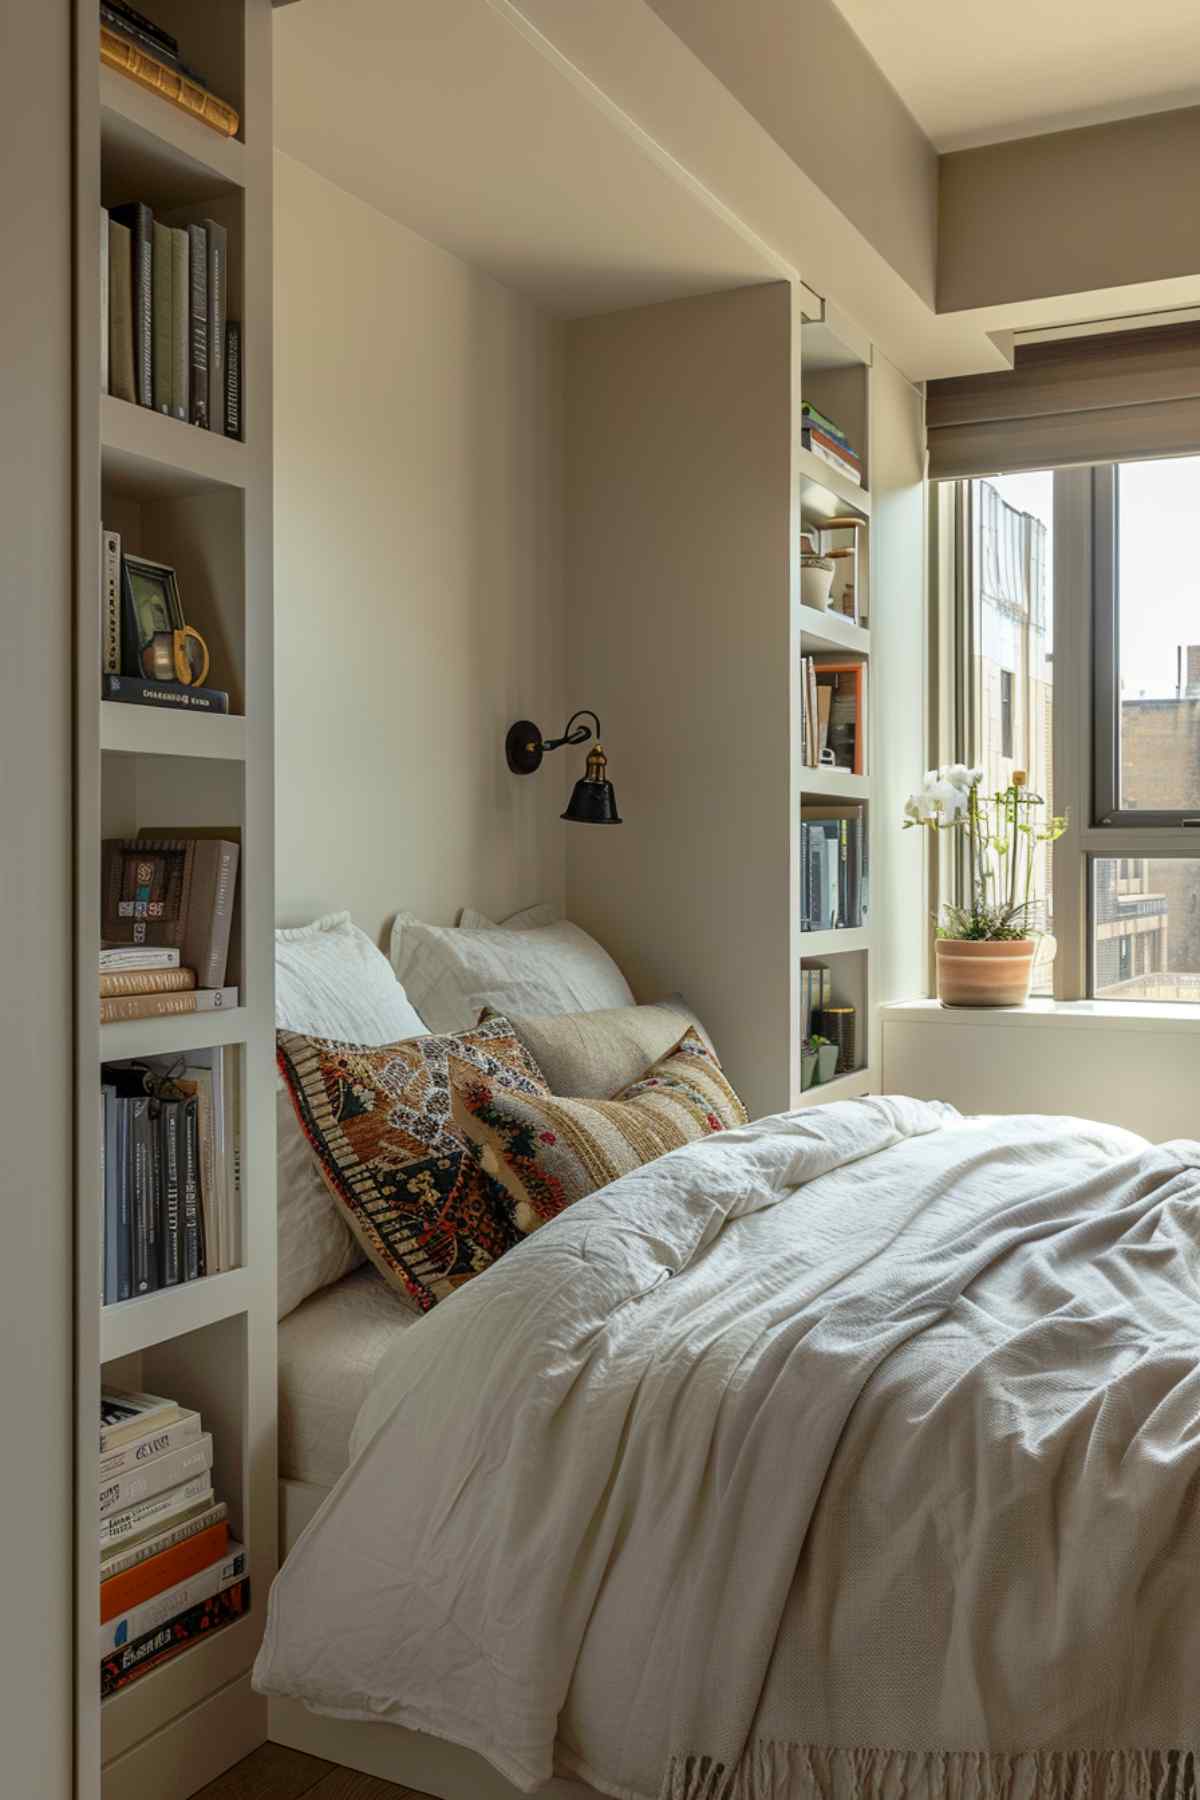 Discover genius bedroom storage ideas that help you declutter and maximize space. Find innovative solutions for a more organized, spacious, and peaceful bedroom here!